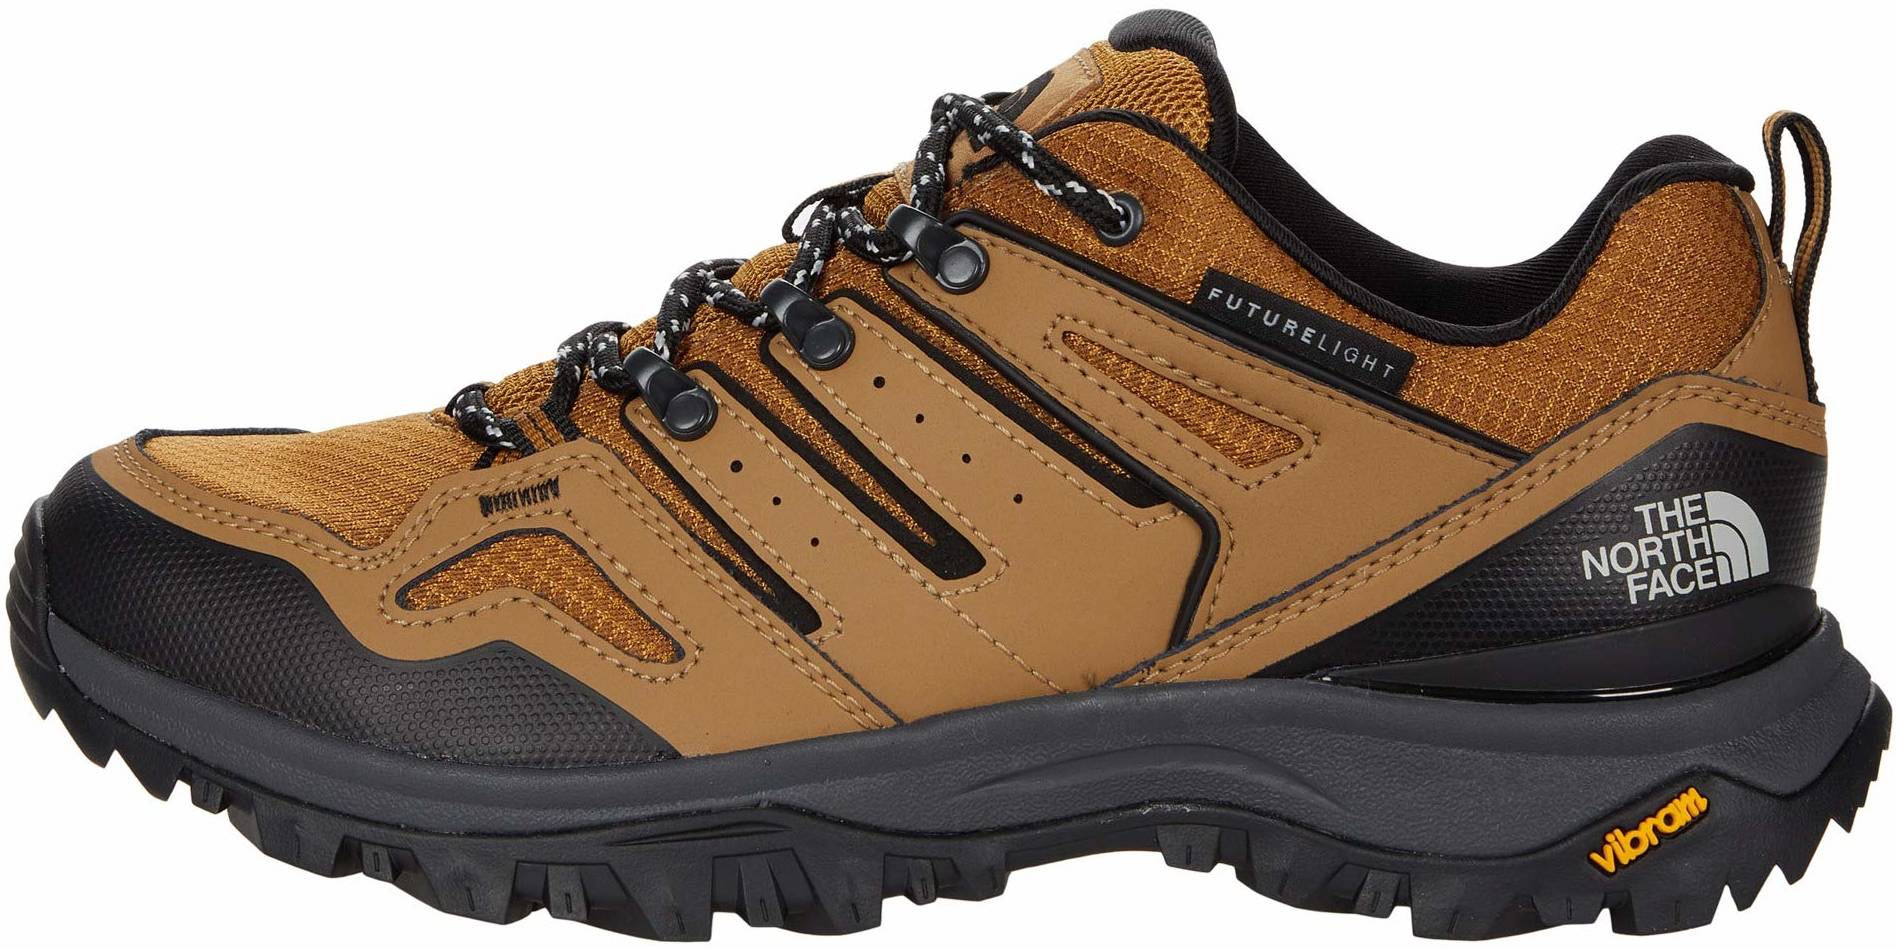 10+ The North Face hiking shoes: Save up to 51% | RunRepeat